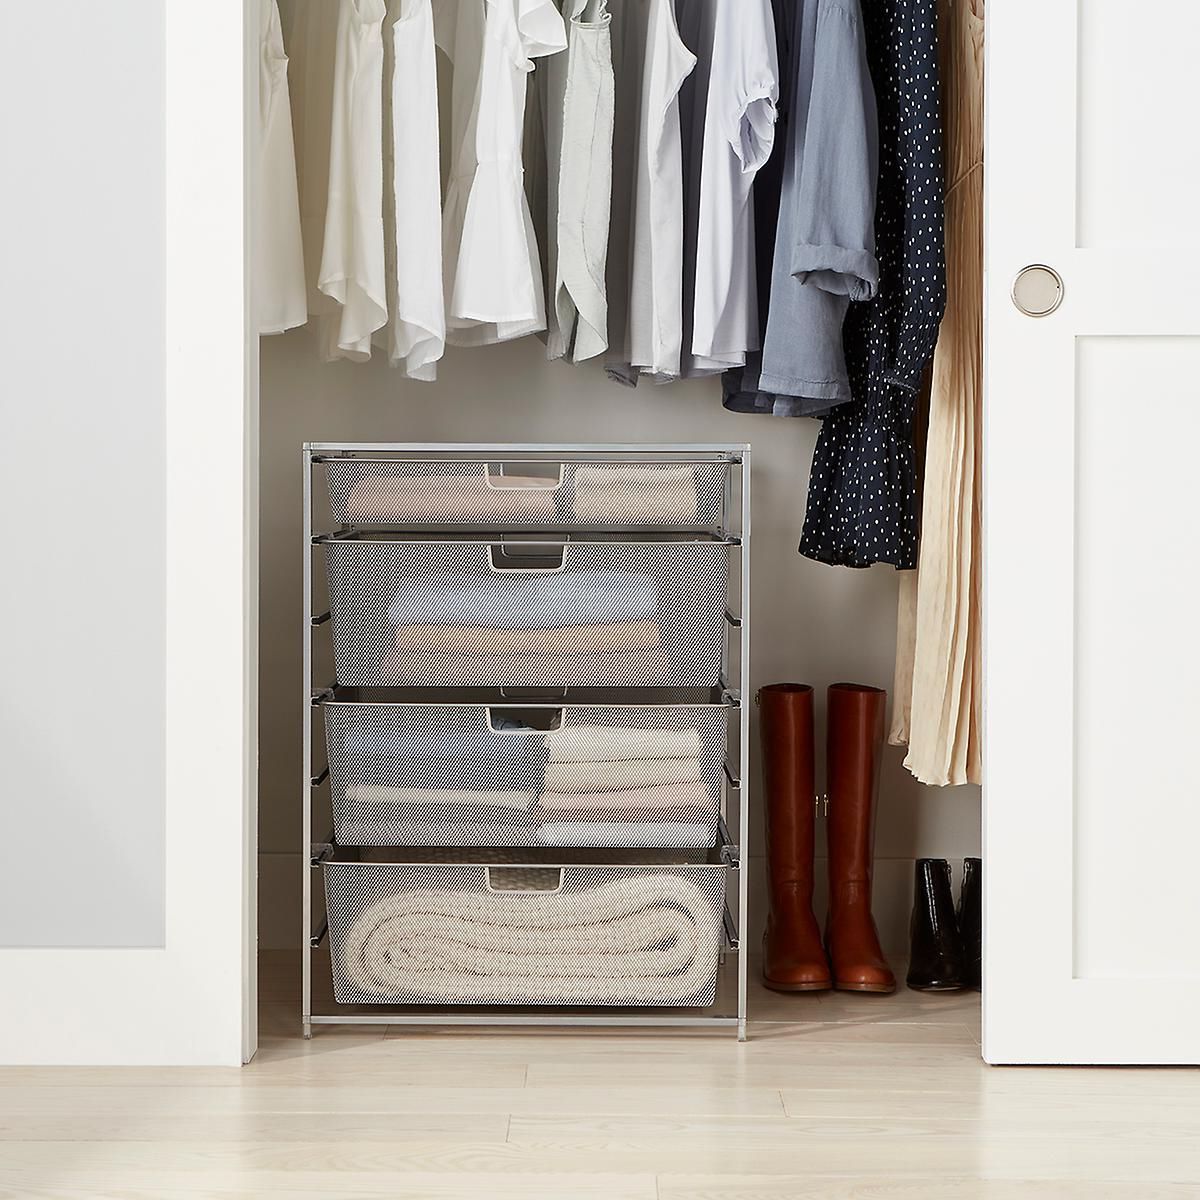 35 Best Closet Organization Ideas To Maximize Space Pertaining To Drawers And Shelves For Wardrobes (View 5 of 20)